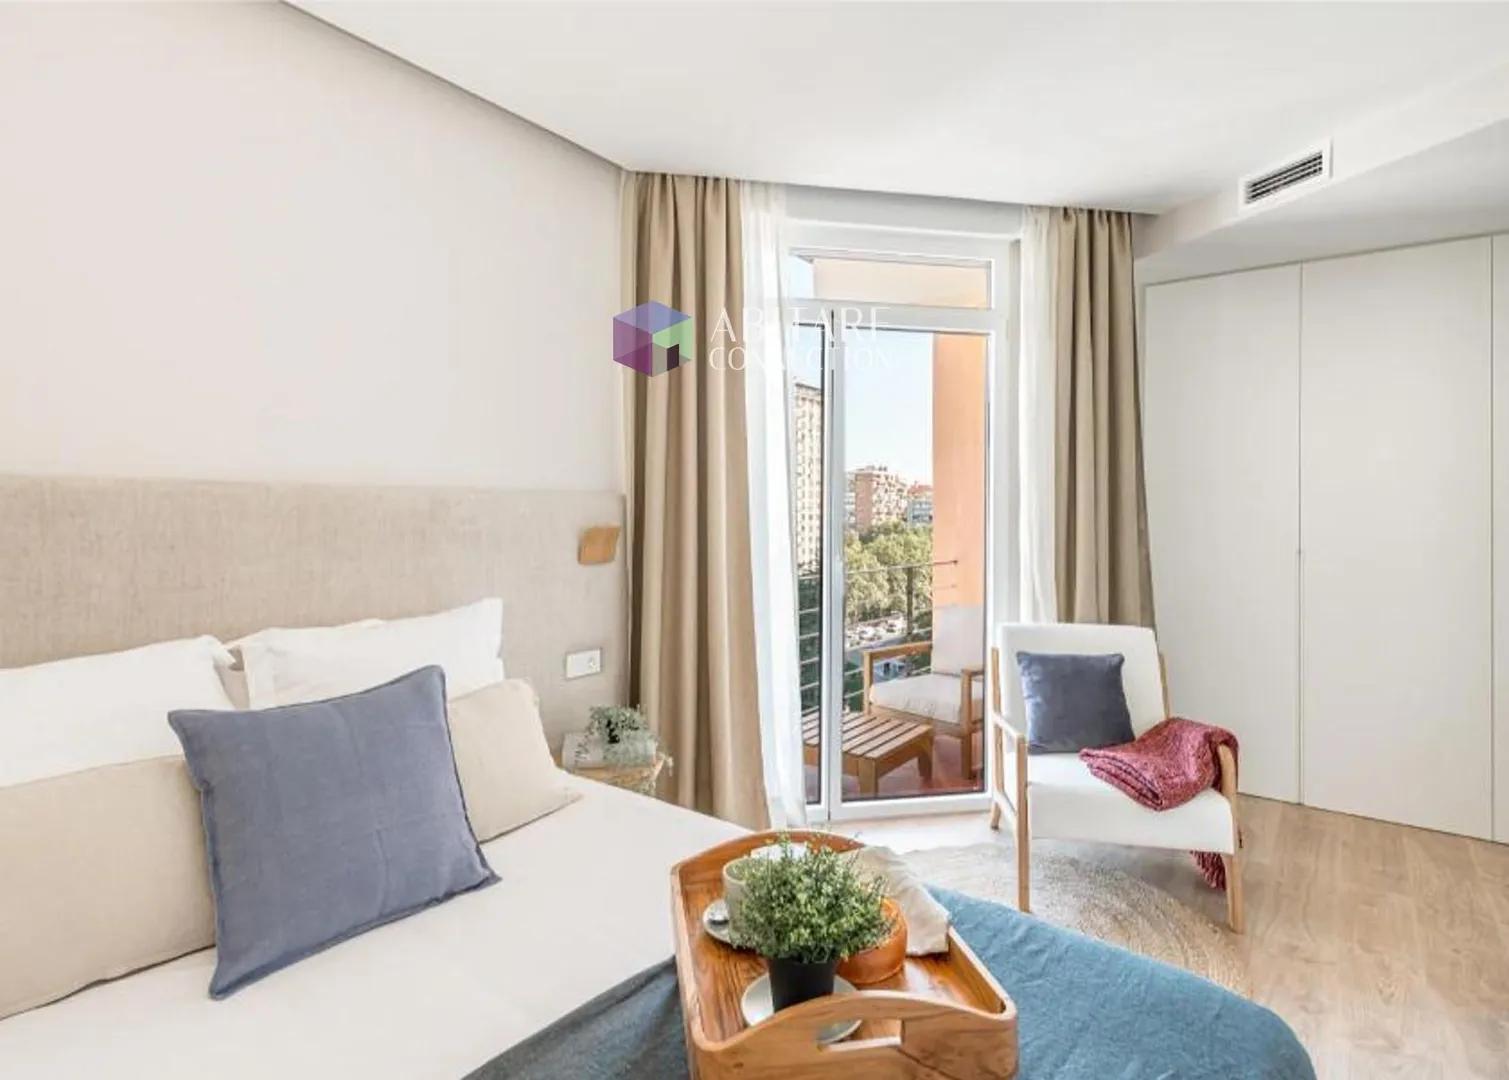 Renovated apartment on Paseo de la Castellana with exceptional views